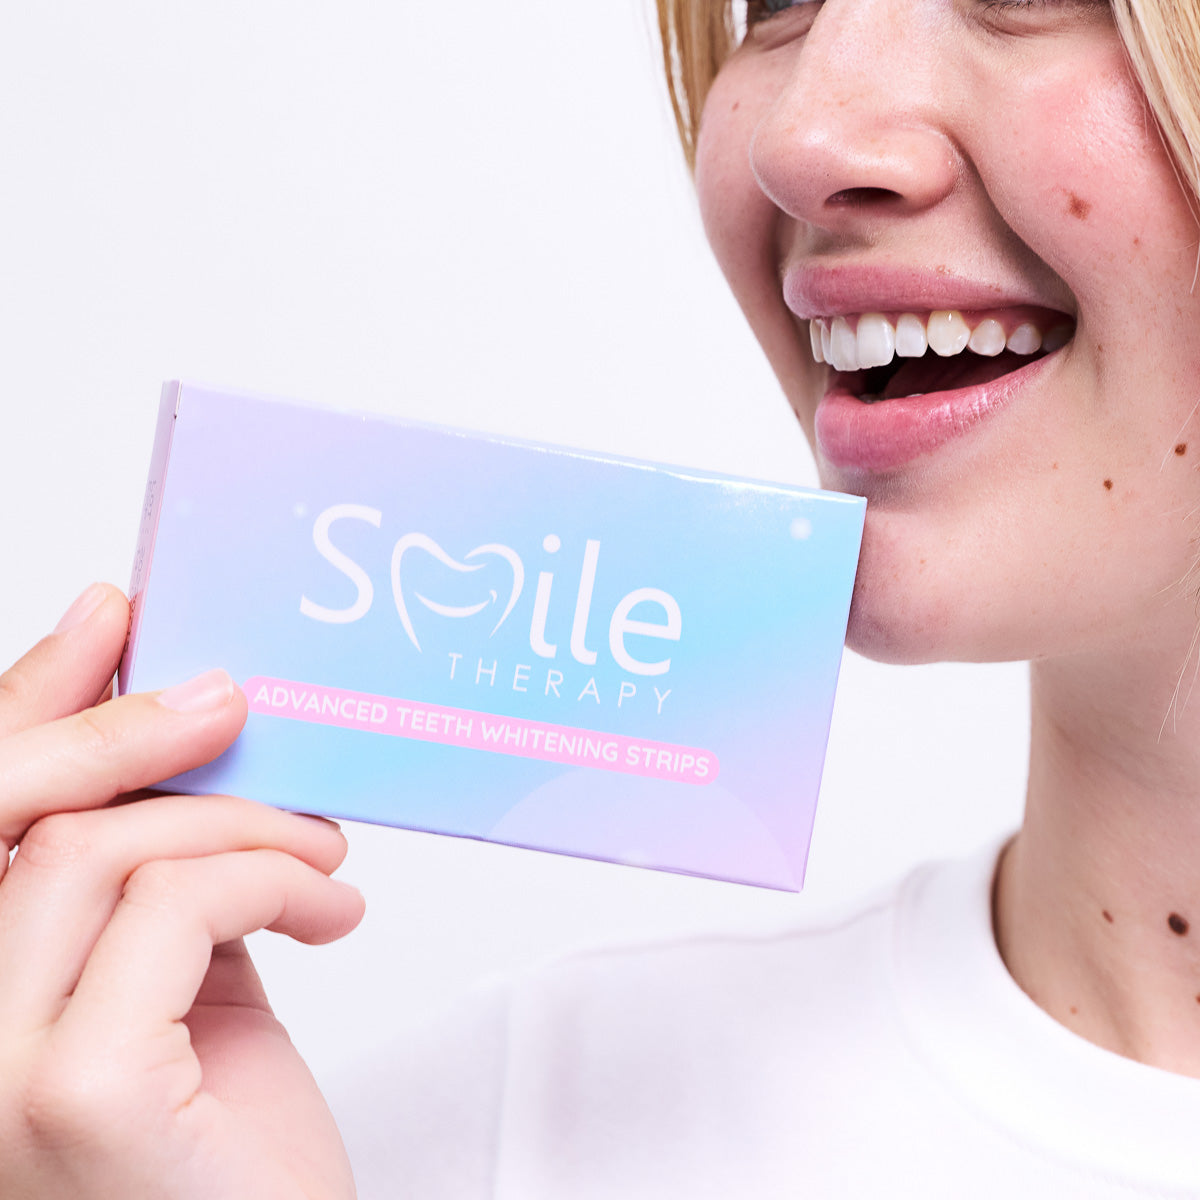 Teeth Whitening & Cleaning Strips